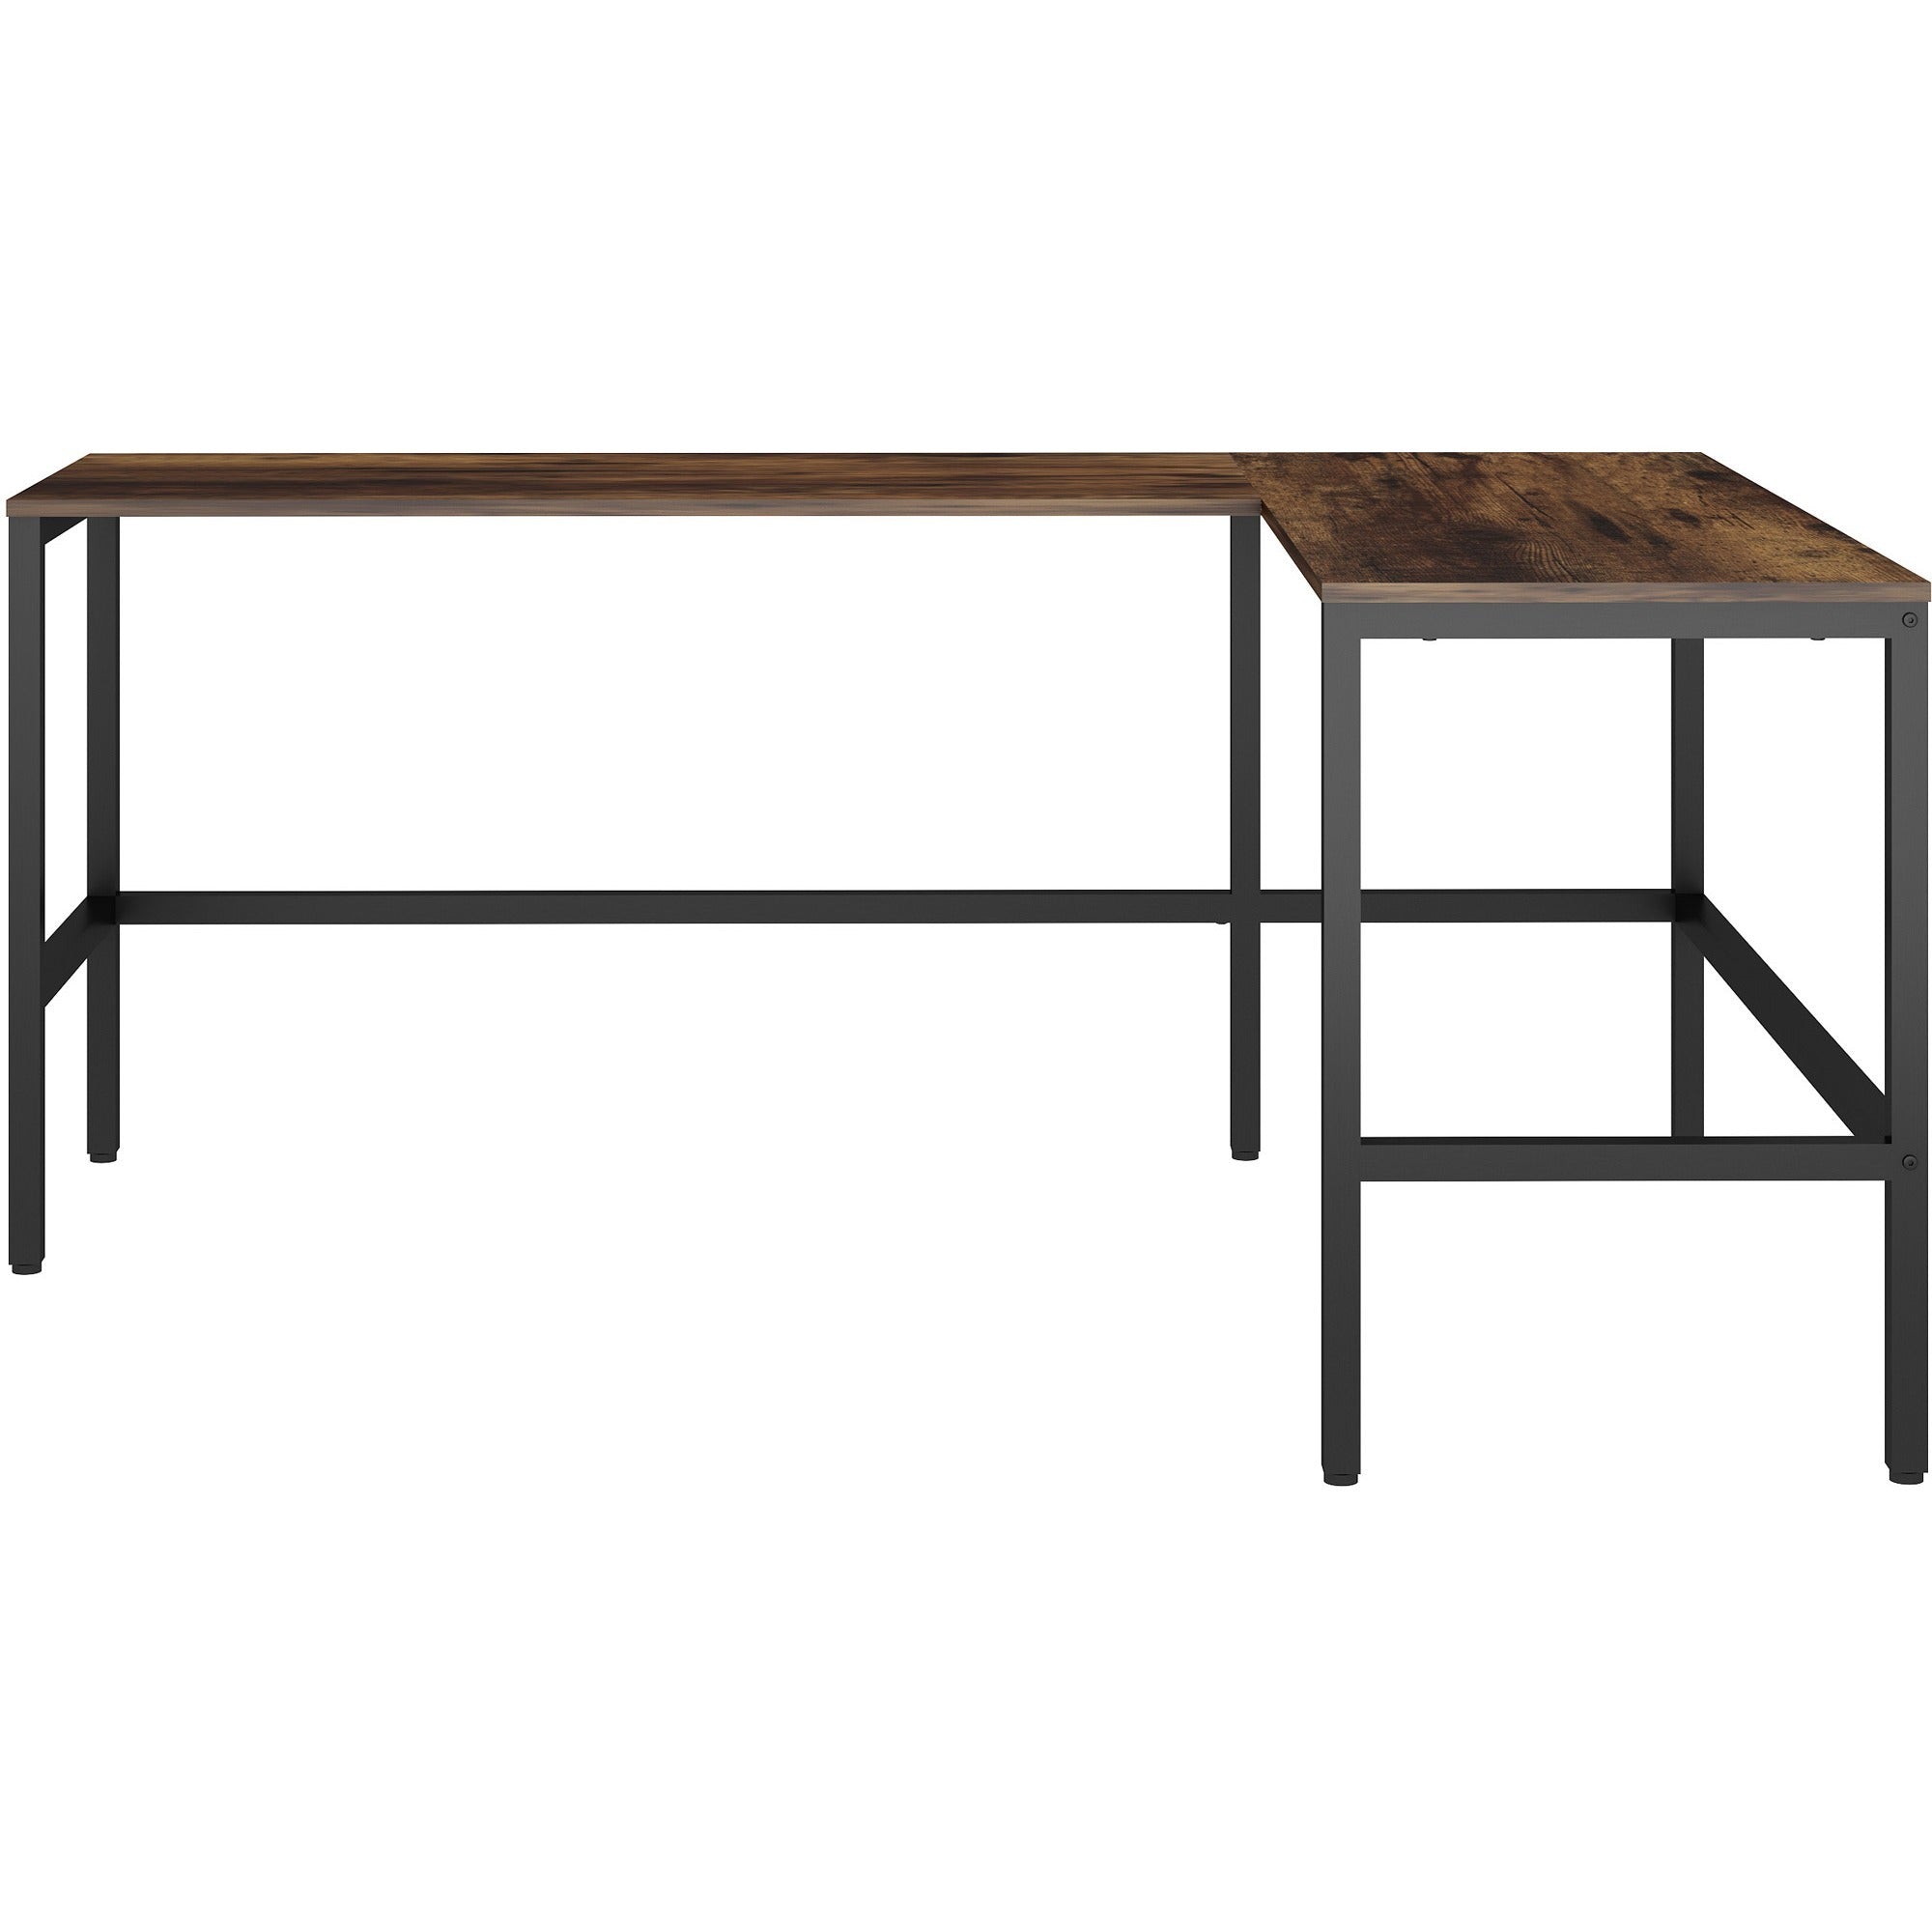 NuSparc L-Shaped Metal Frame Desk - For - Table TopVintage Oak L-shaped, Black Top - Contemporary Style - 200 lb Capacity x 67" Table Top Width x 47.20" Table Top Depth x 1" Table Top Thickness - 29.20" Height - Assembly Required - High Pressure Lami - 2